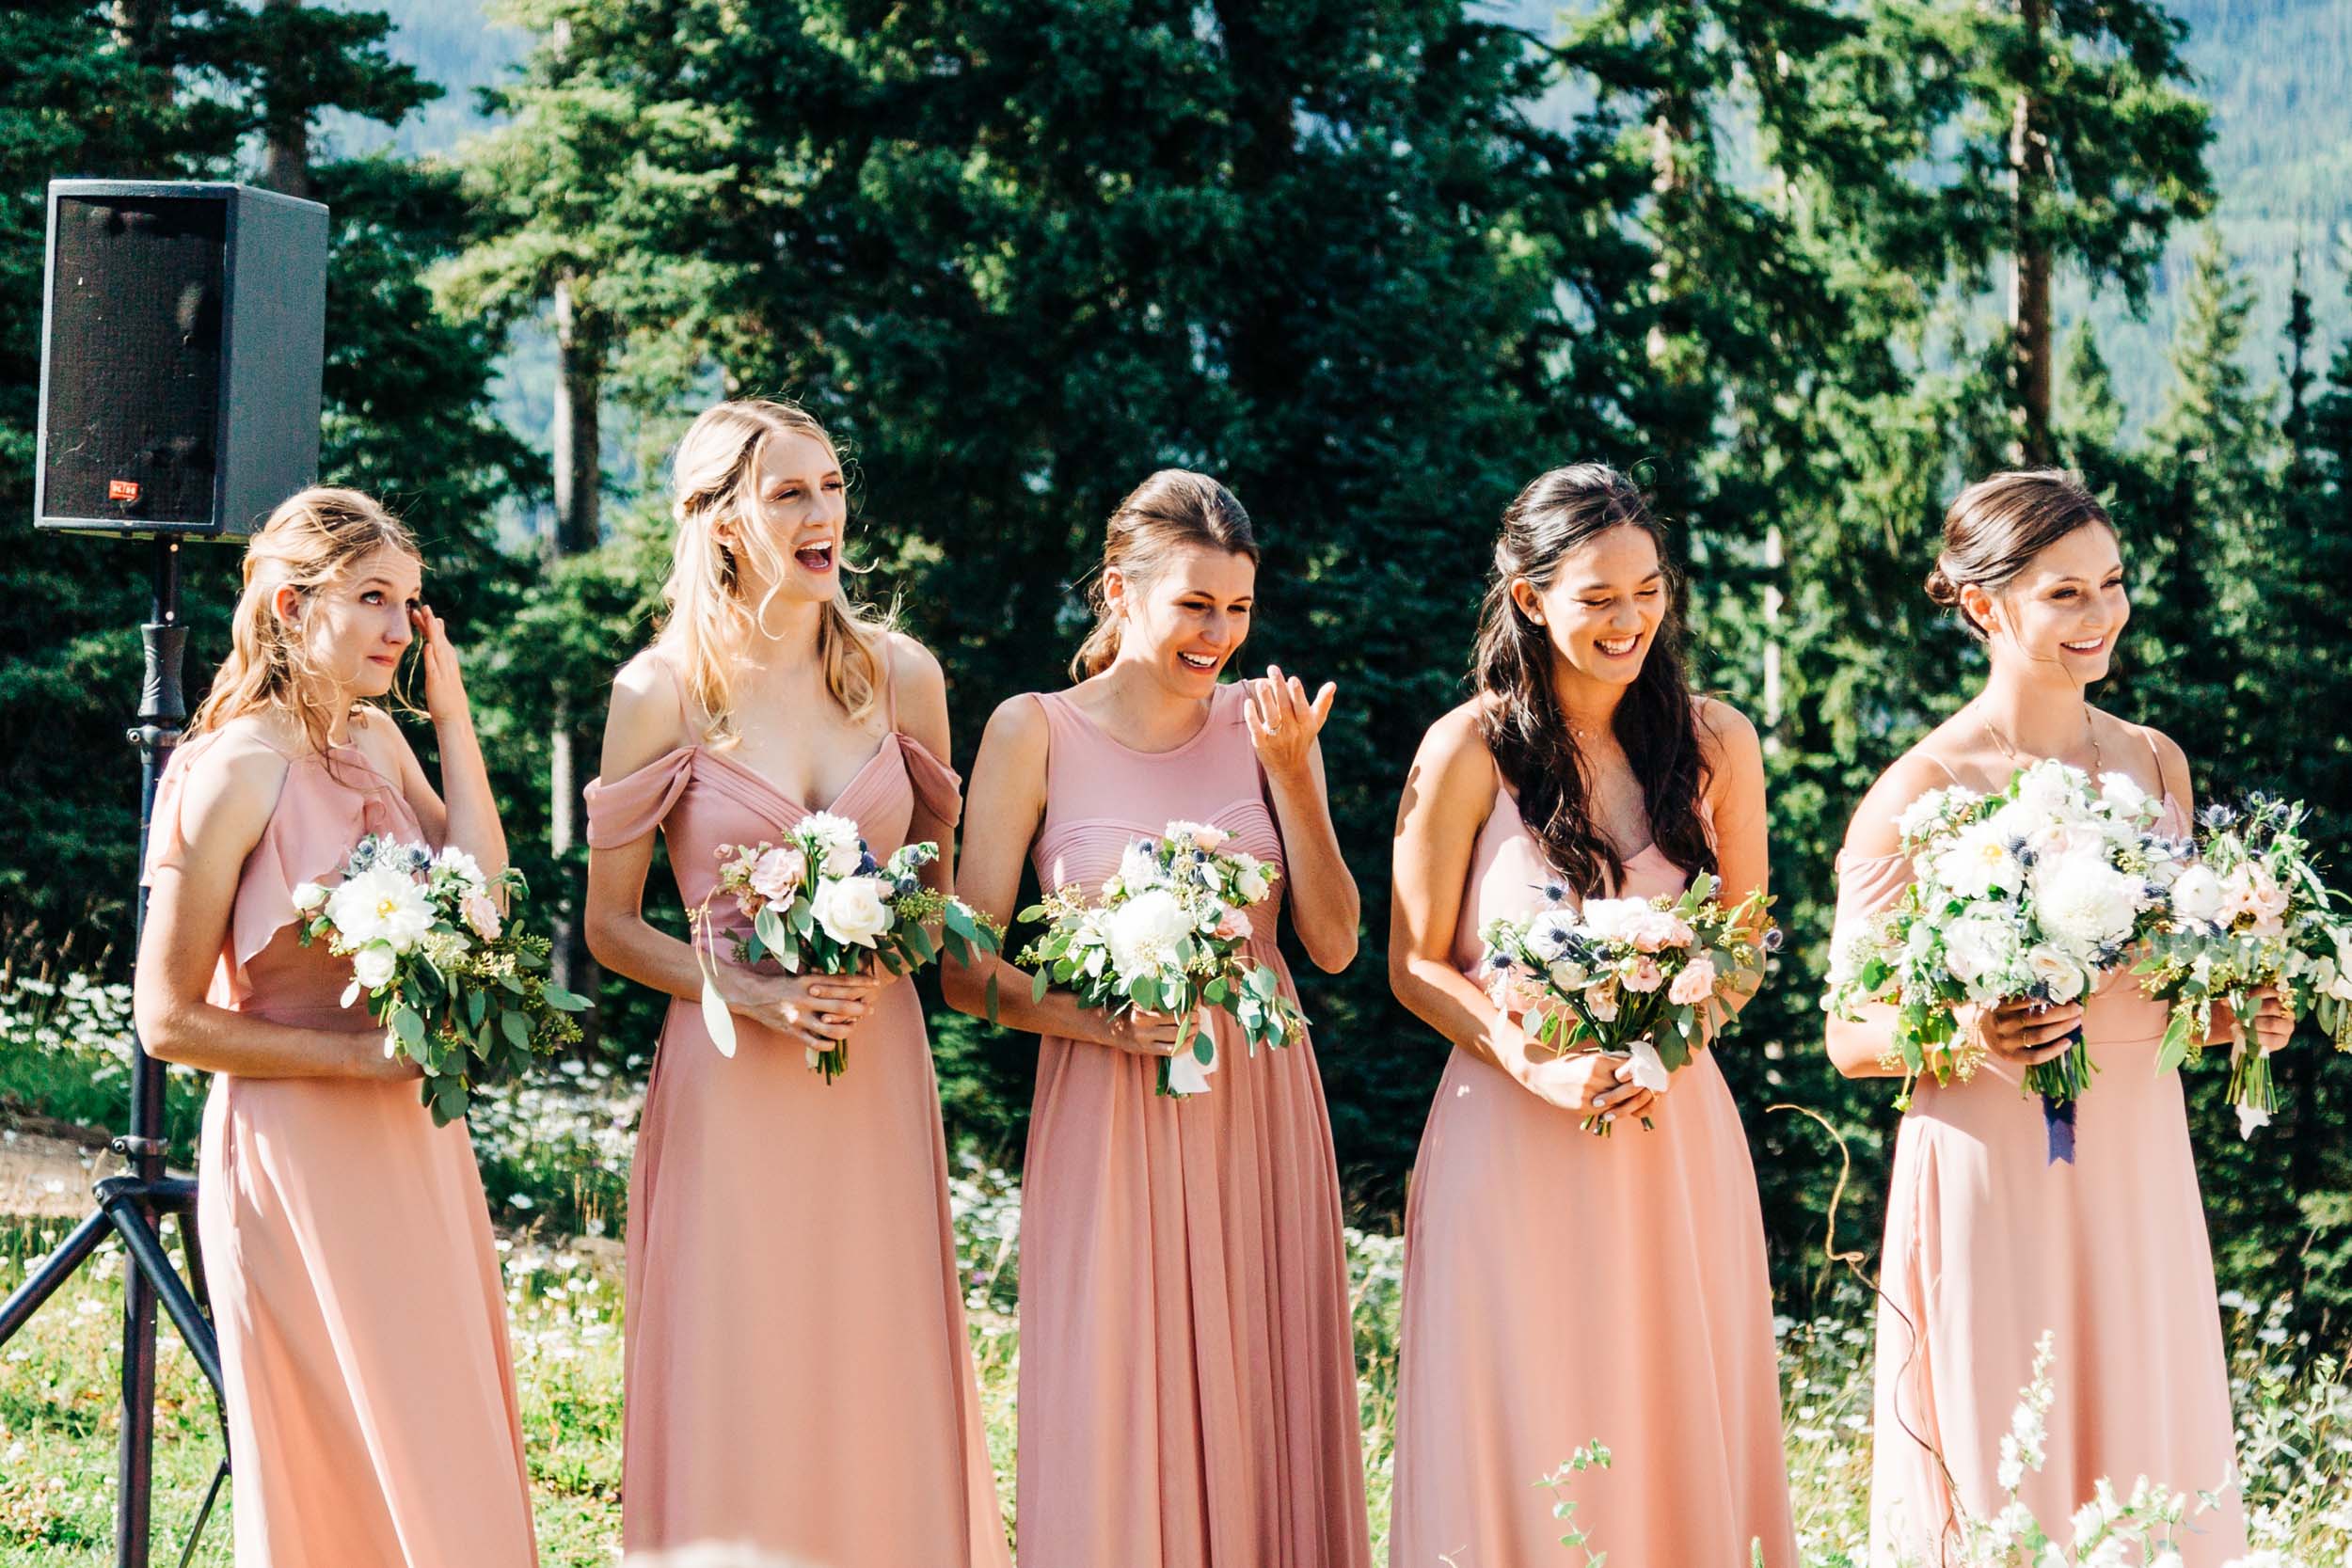 Bridesmaids crying at ceremony